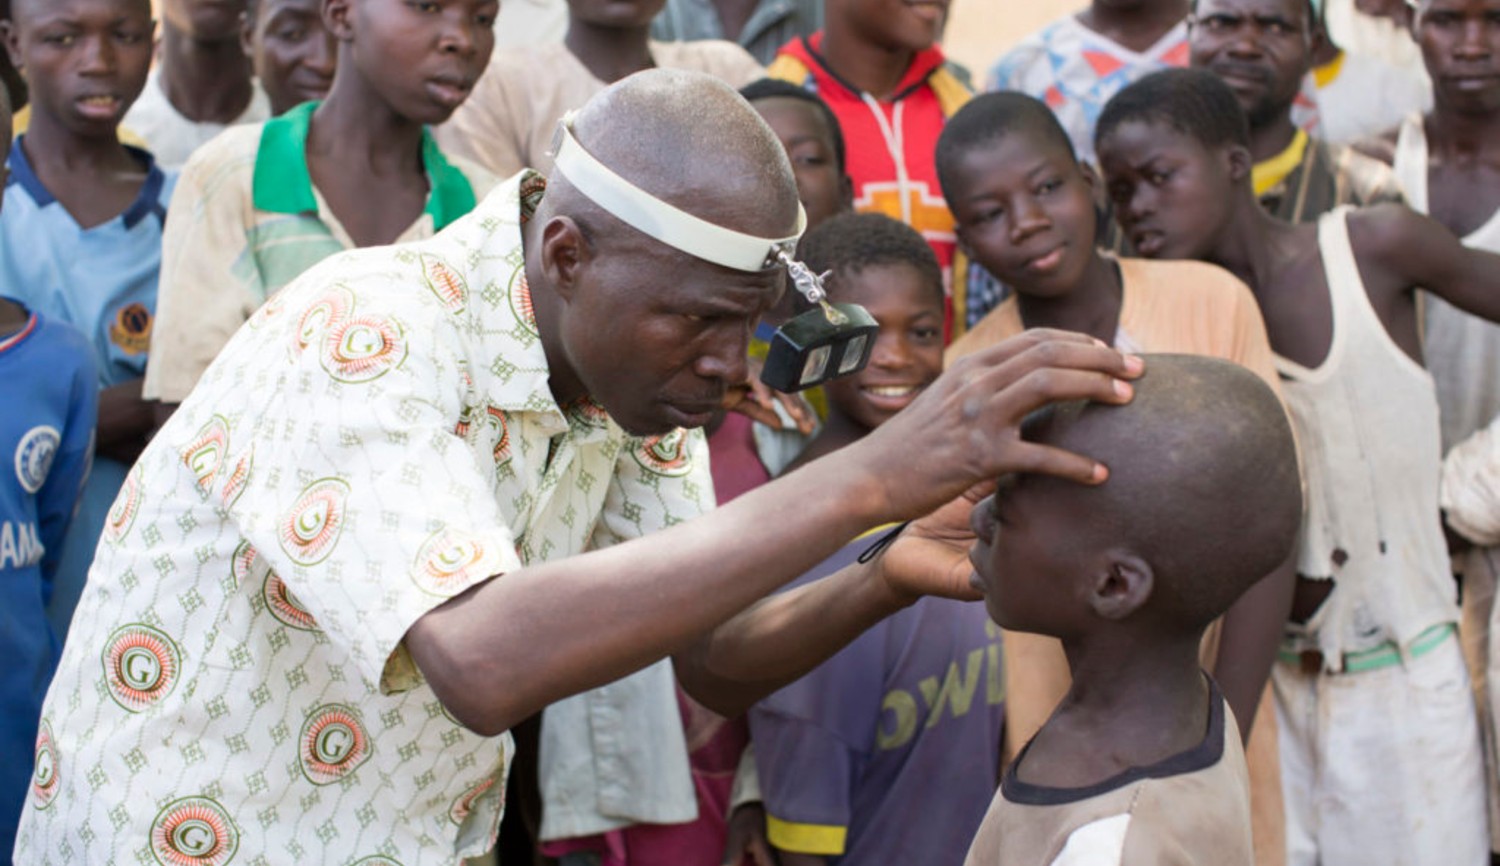 A health worker checks the eyes of a child for signs of disease. Other children are standing behind watching.